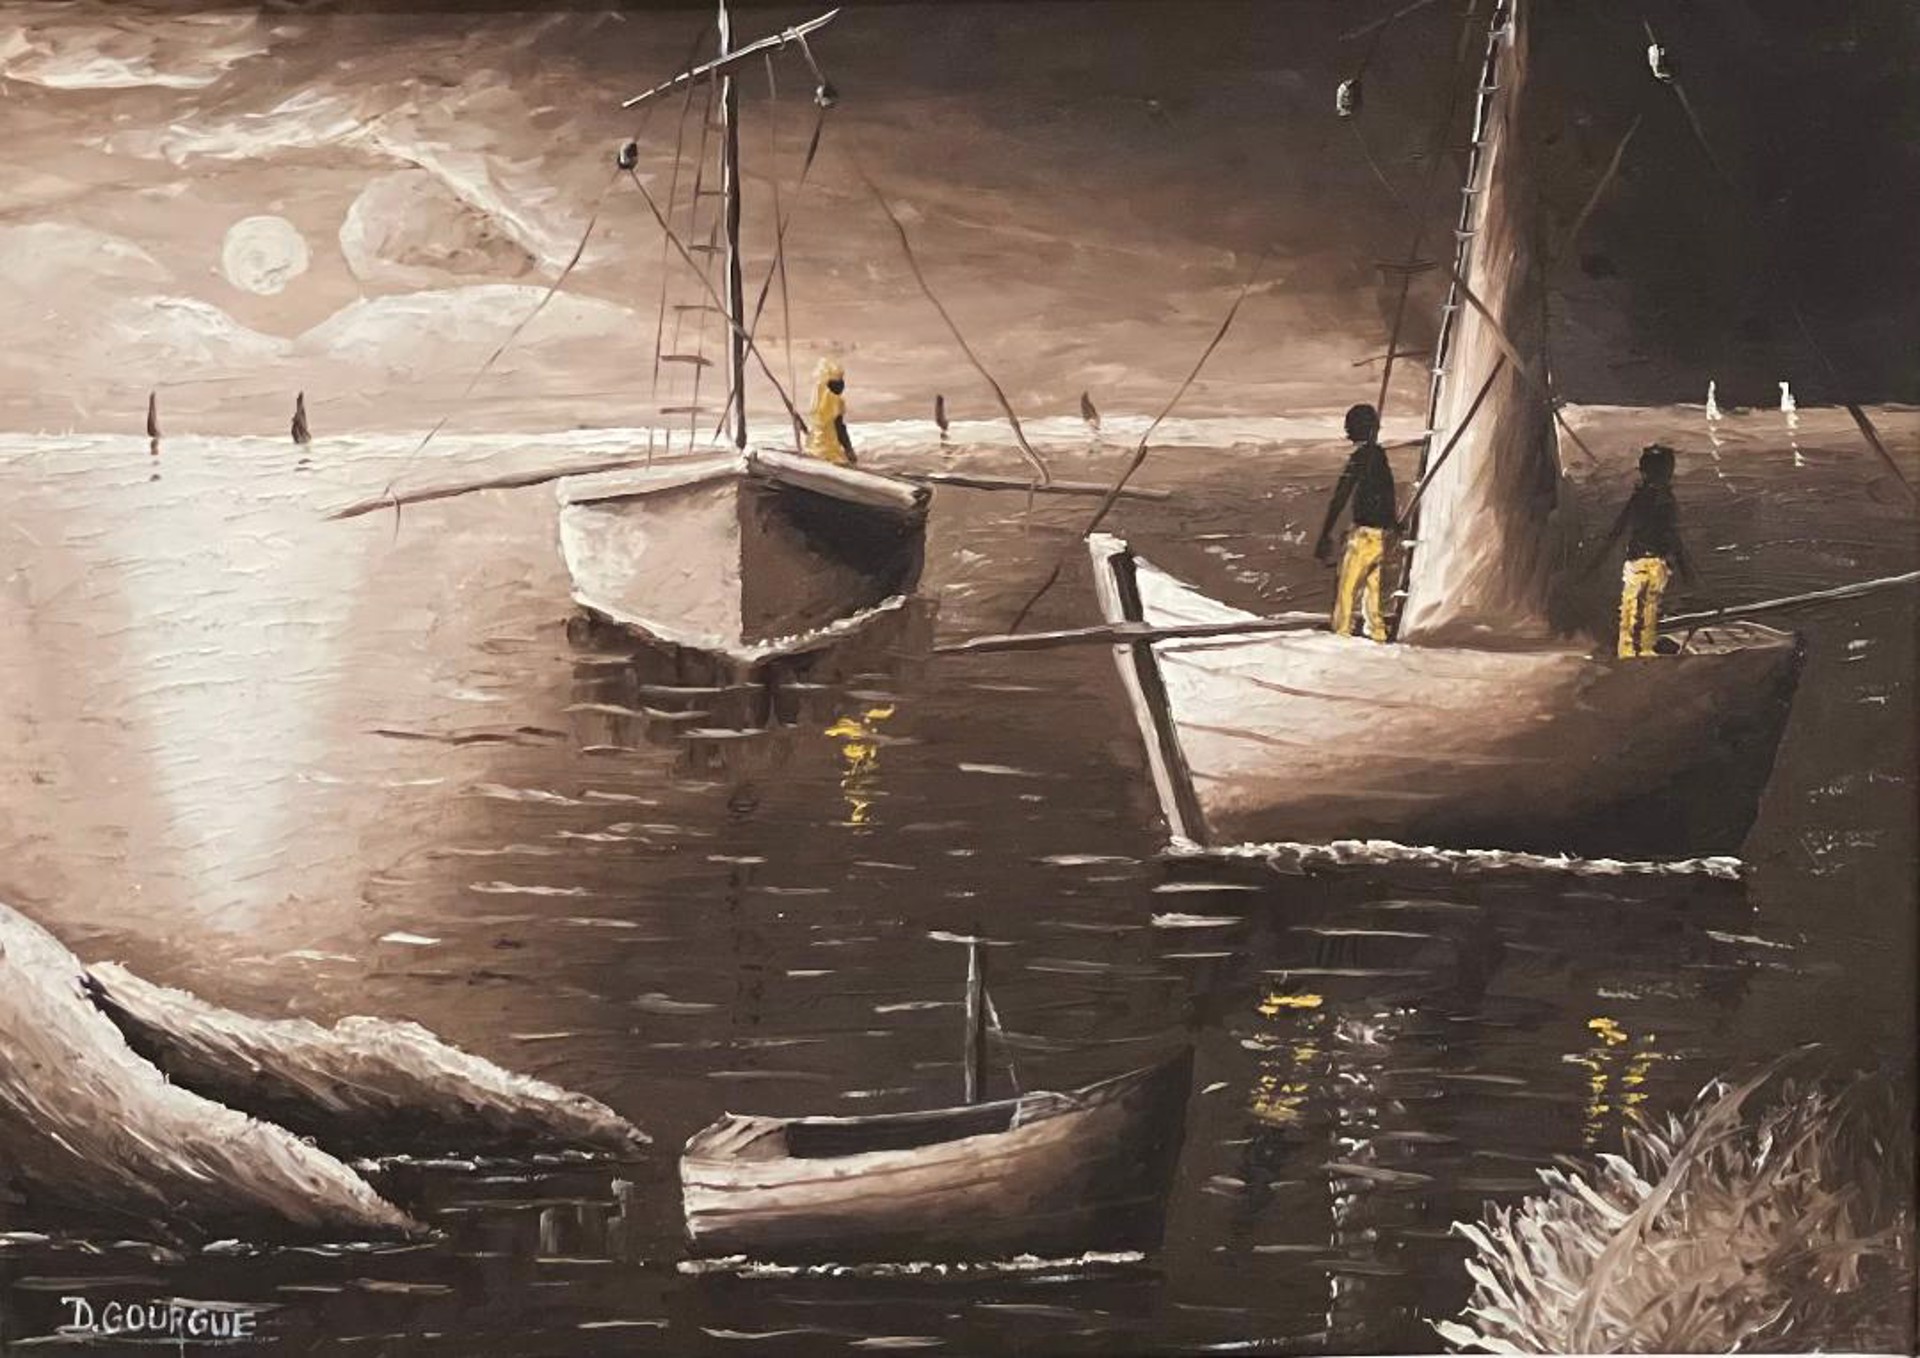 Sailors at Night #1MFN by Decourcelle Gourgue